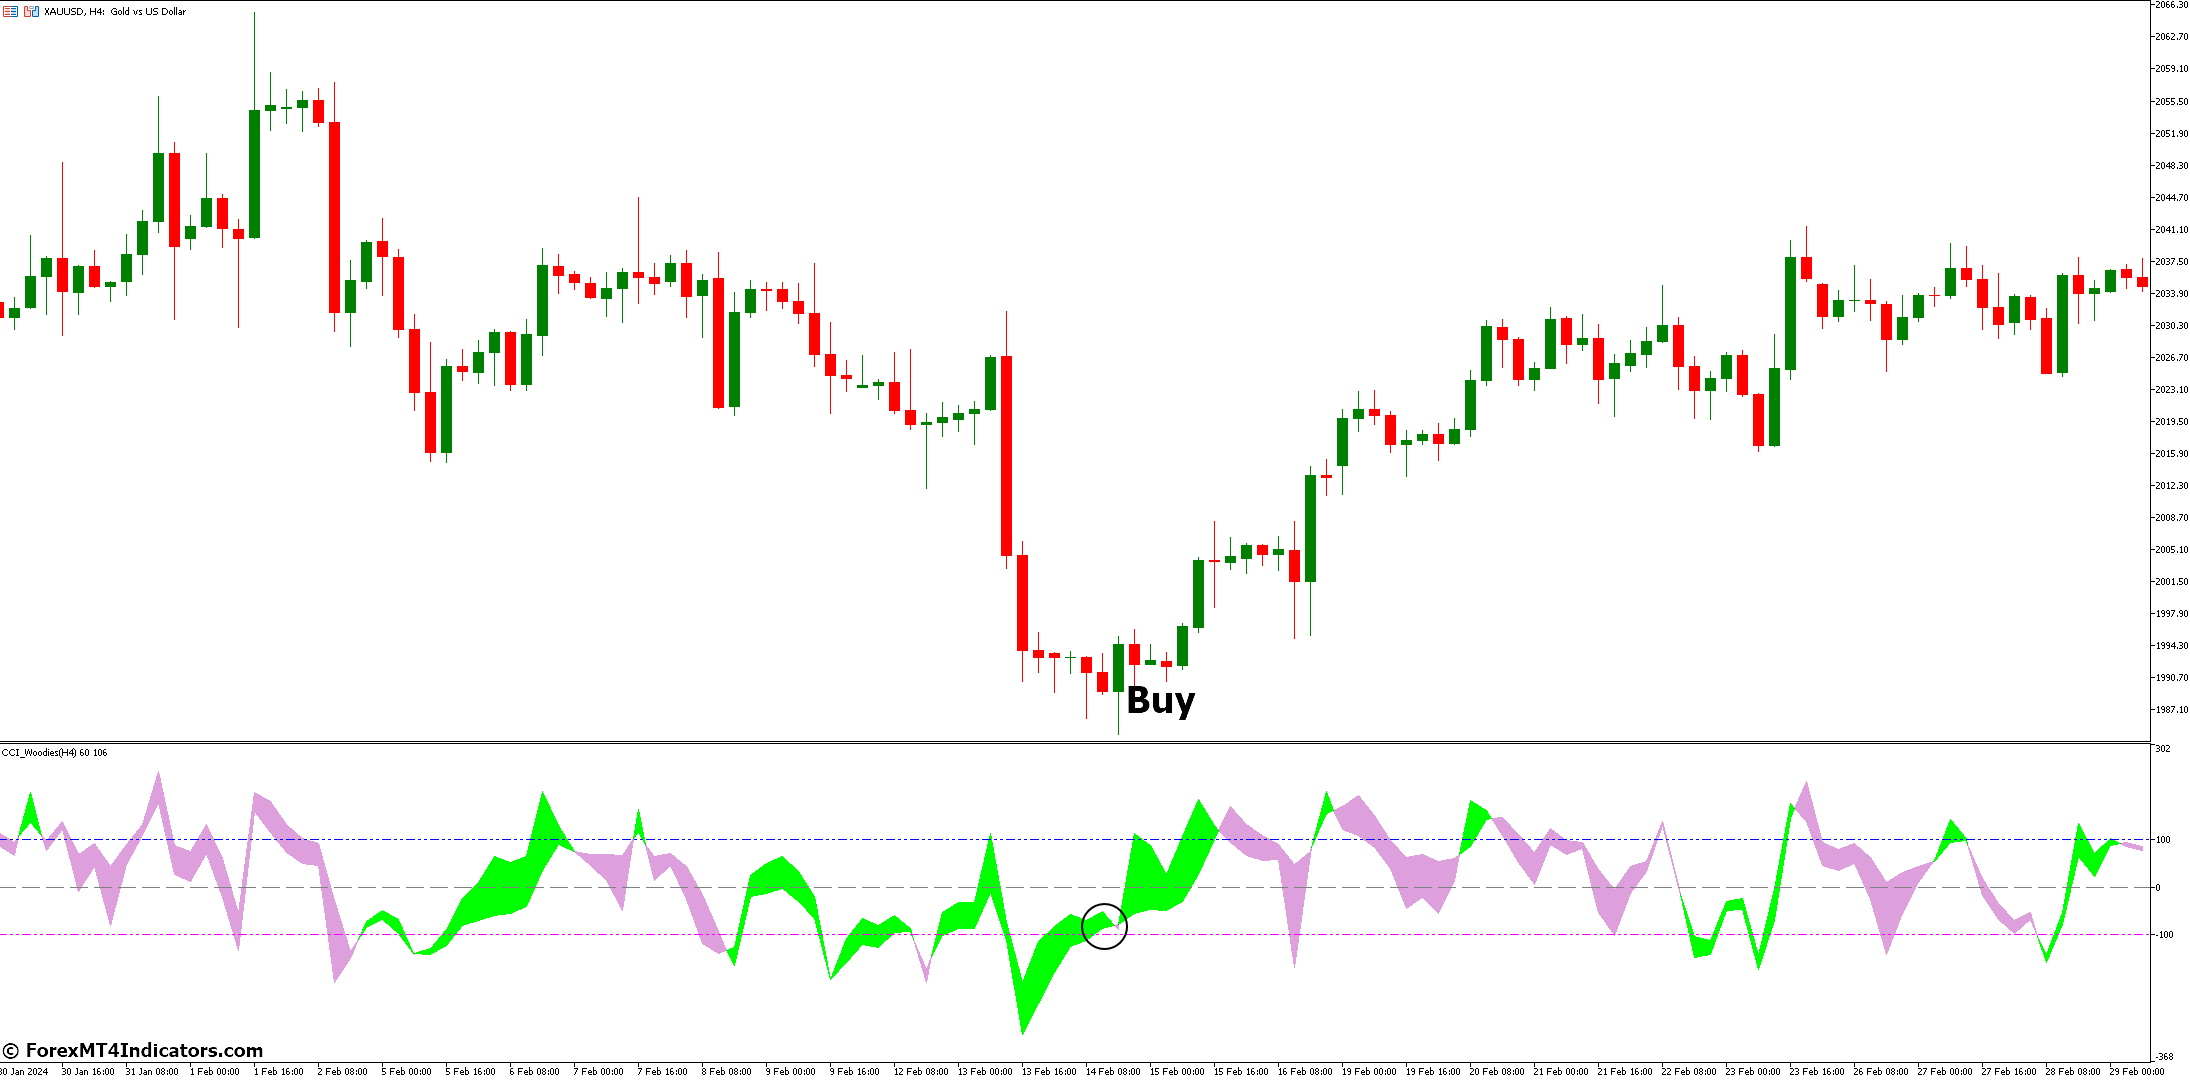 How to Trade with CCI Woodies HTF Forex Indicator - Buy Entry